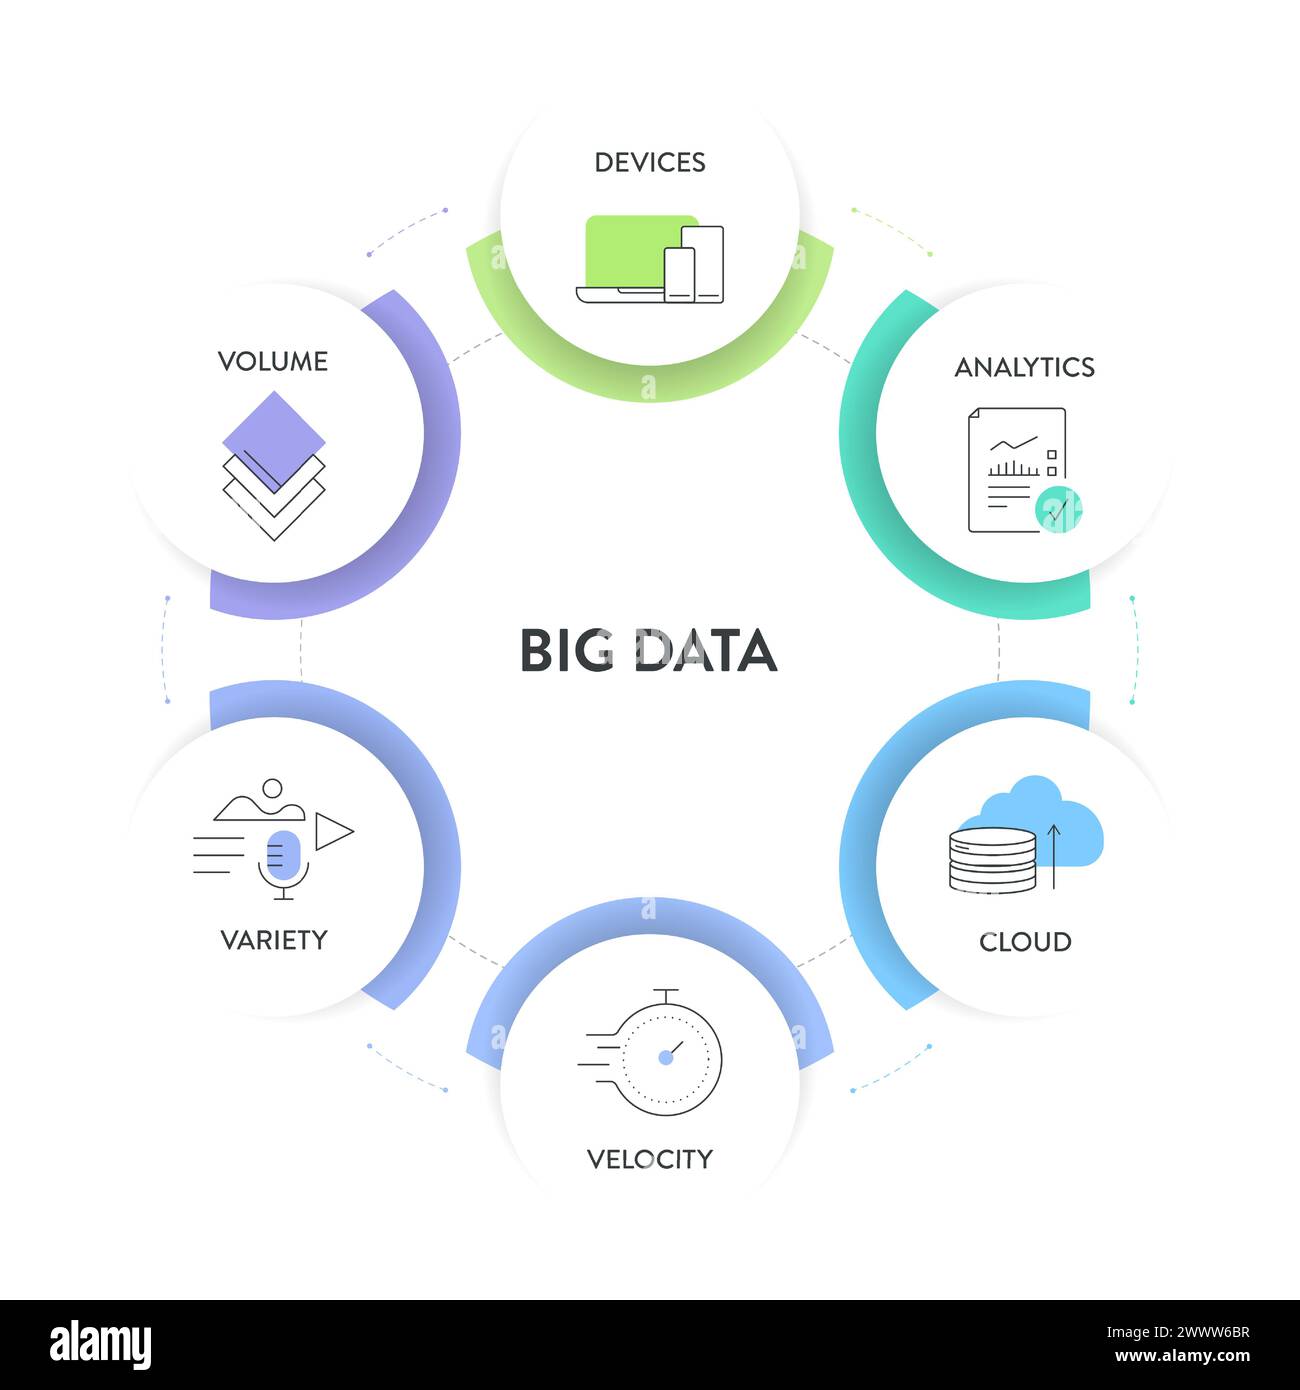 Big data analytic strategy infographic diagram chart illustration banner template with icon set vector has volume, devices, analytics, cloud, variety Stock Vector